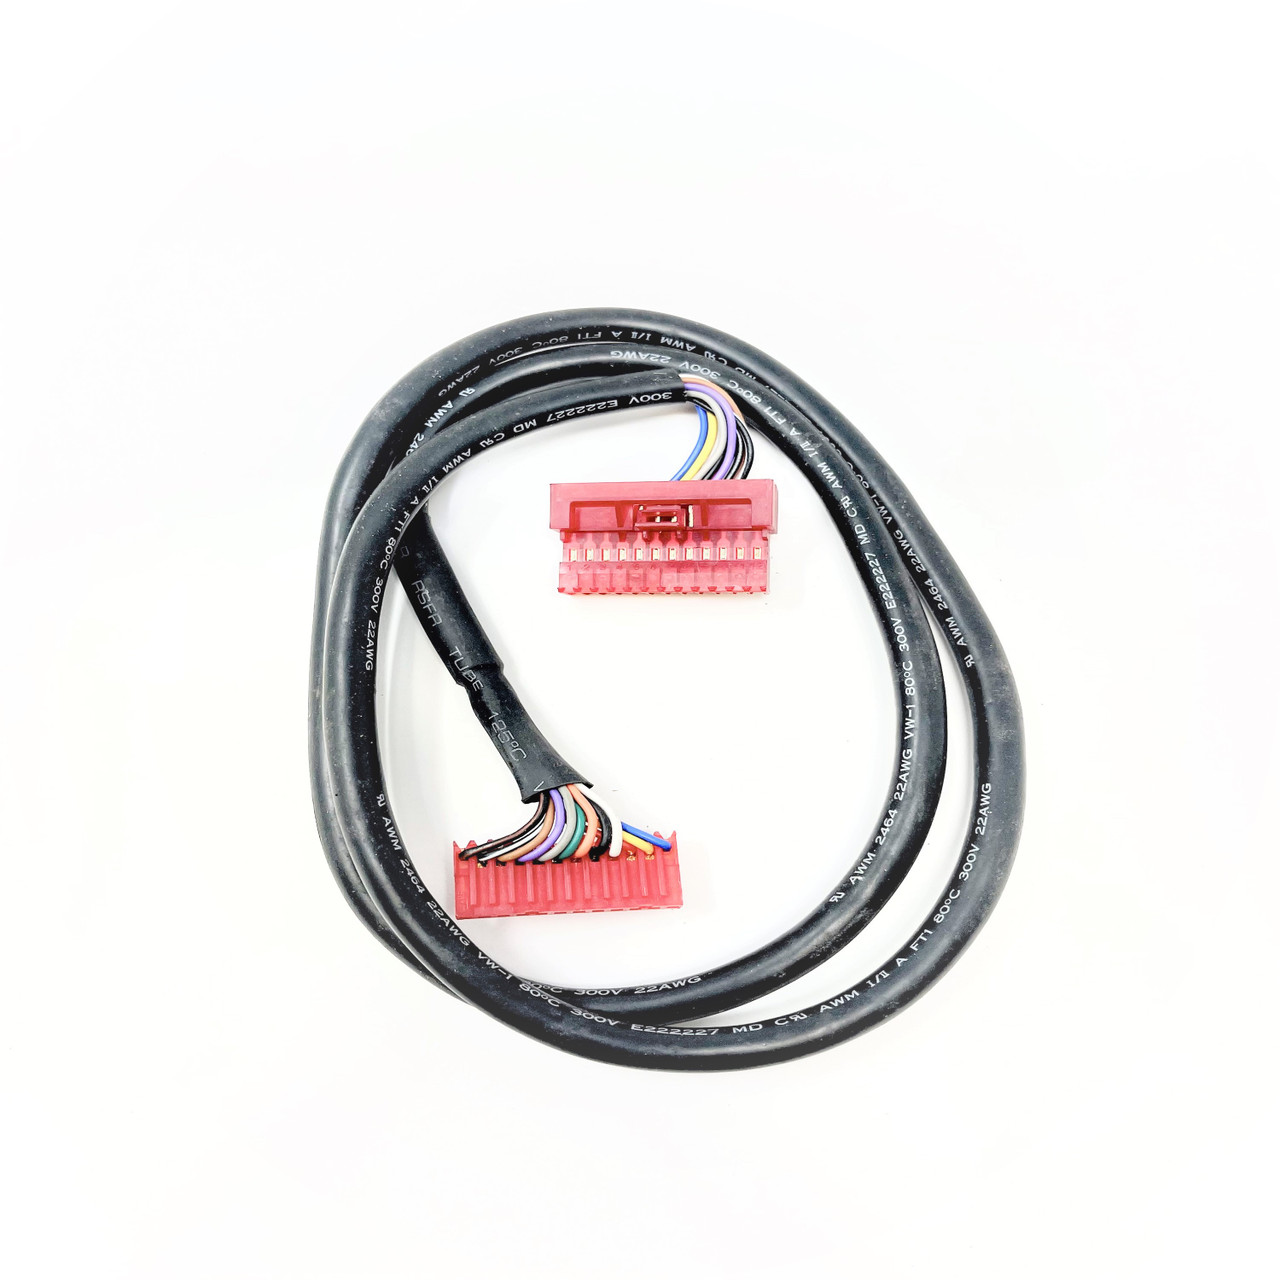 Recumbent 35" Wire Harness Part Number 205455